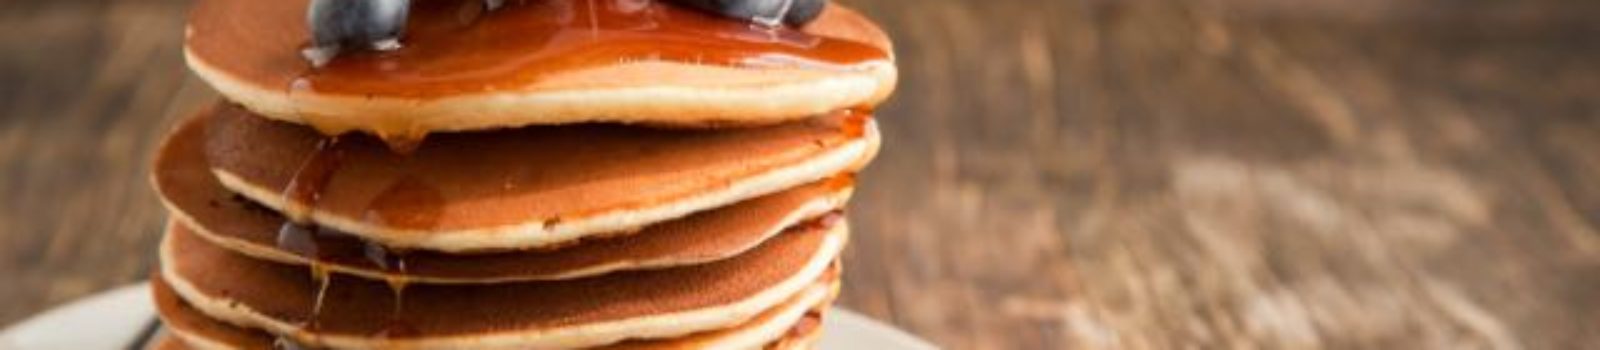 Berry pancakes stack with maple syrup